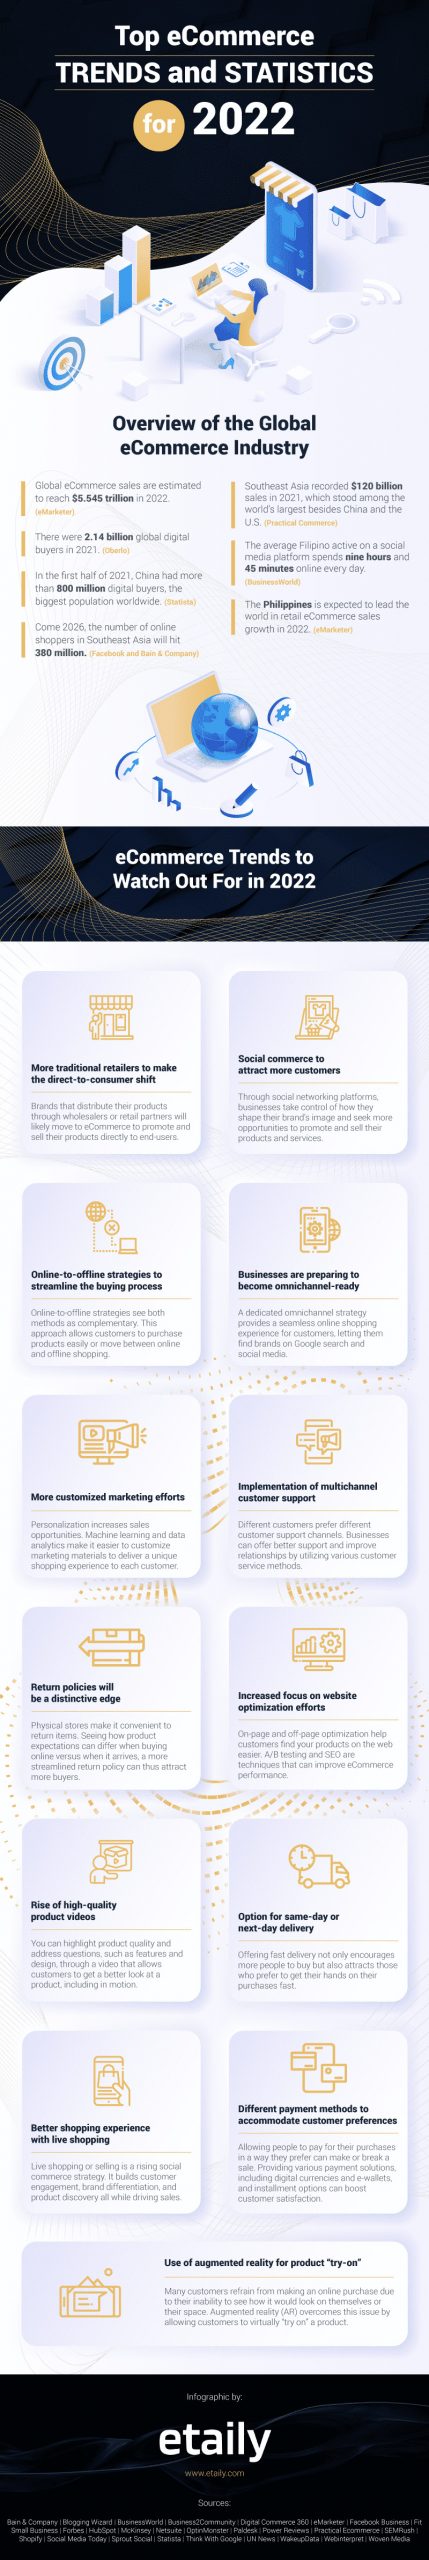 top ecommerce trends and statistics infographic